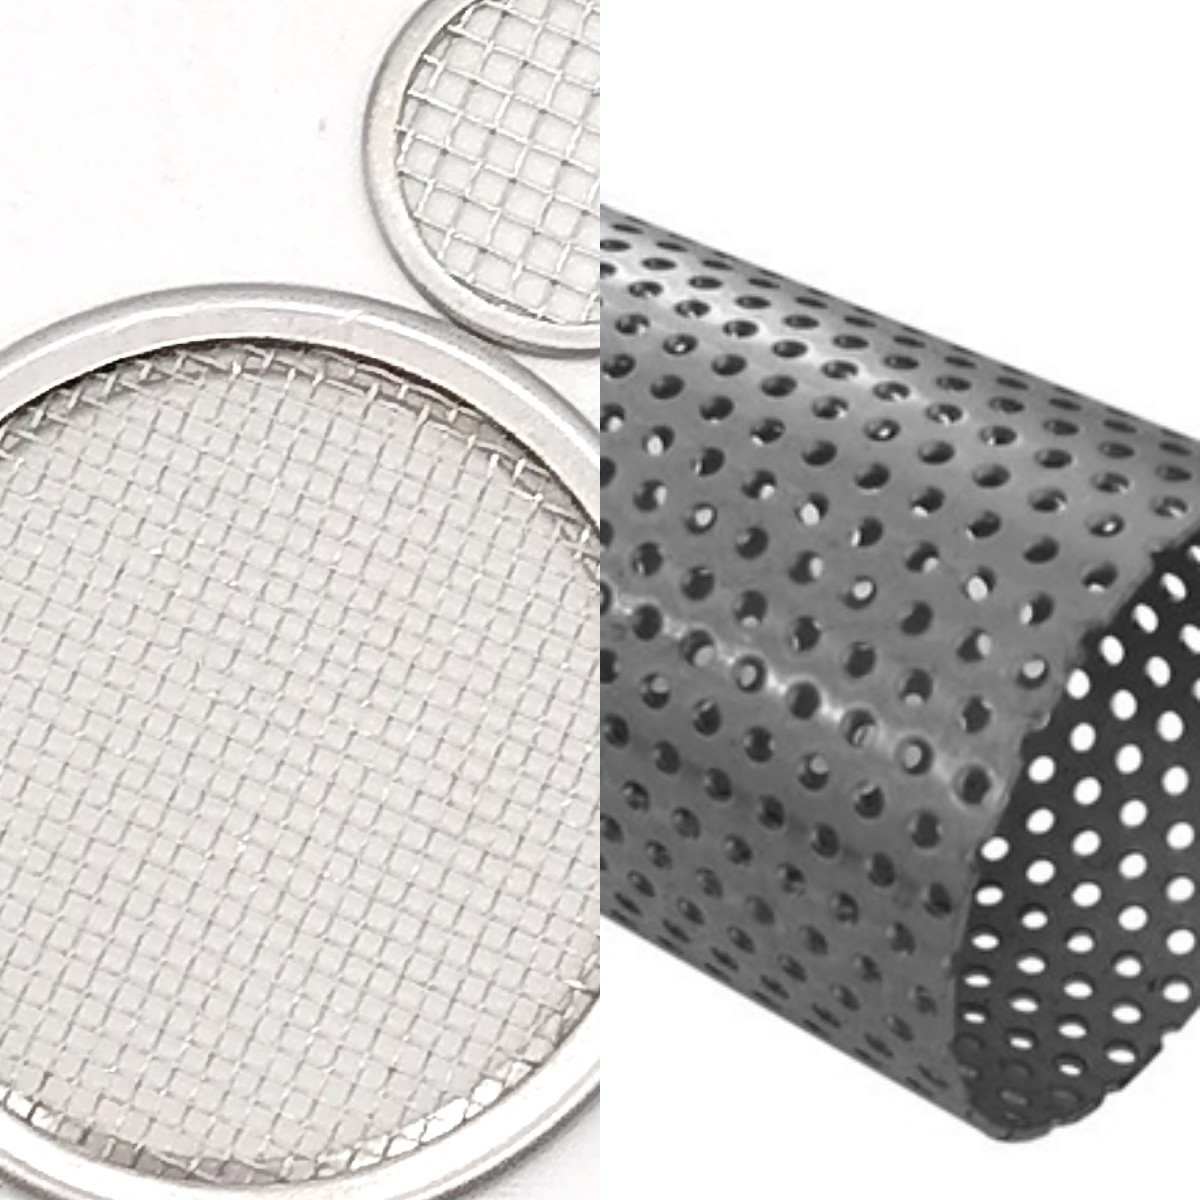 What are the differences between perforated metal mesh and woven wire mesh?